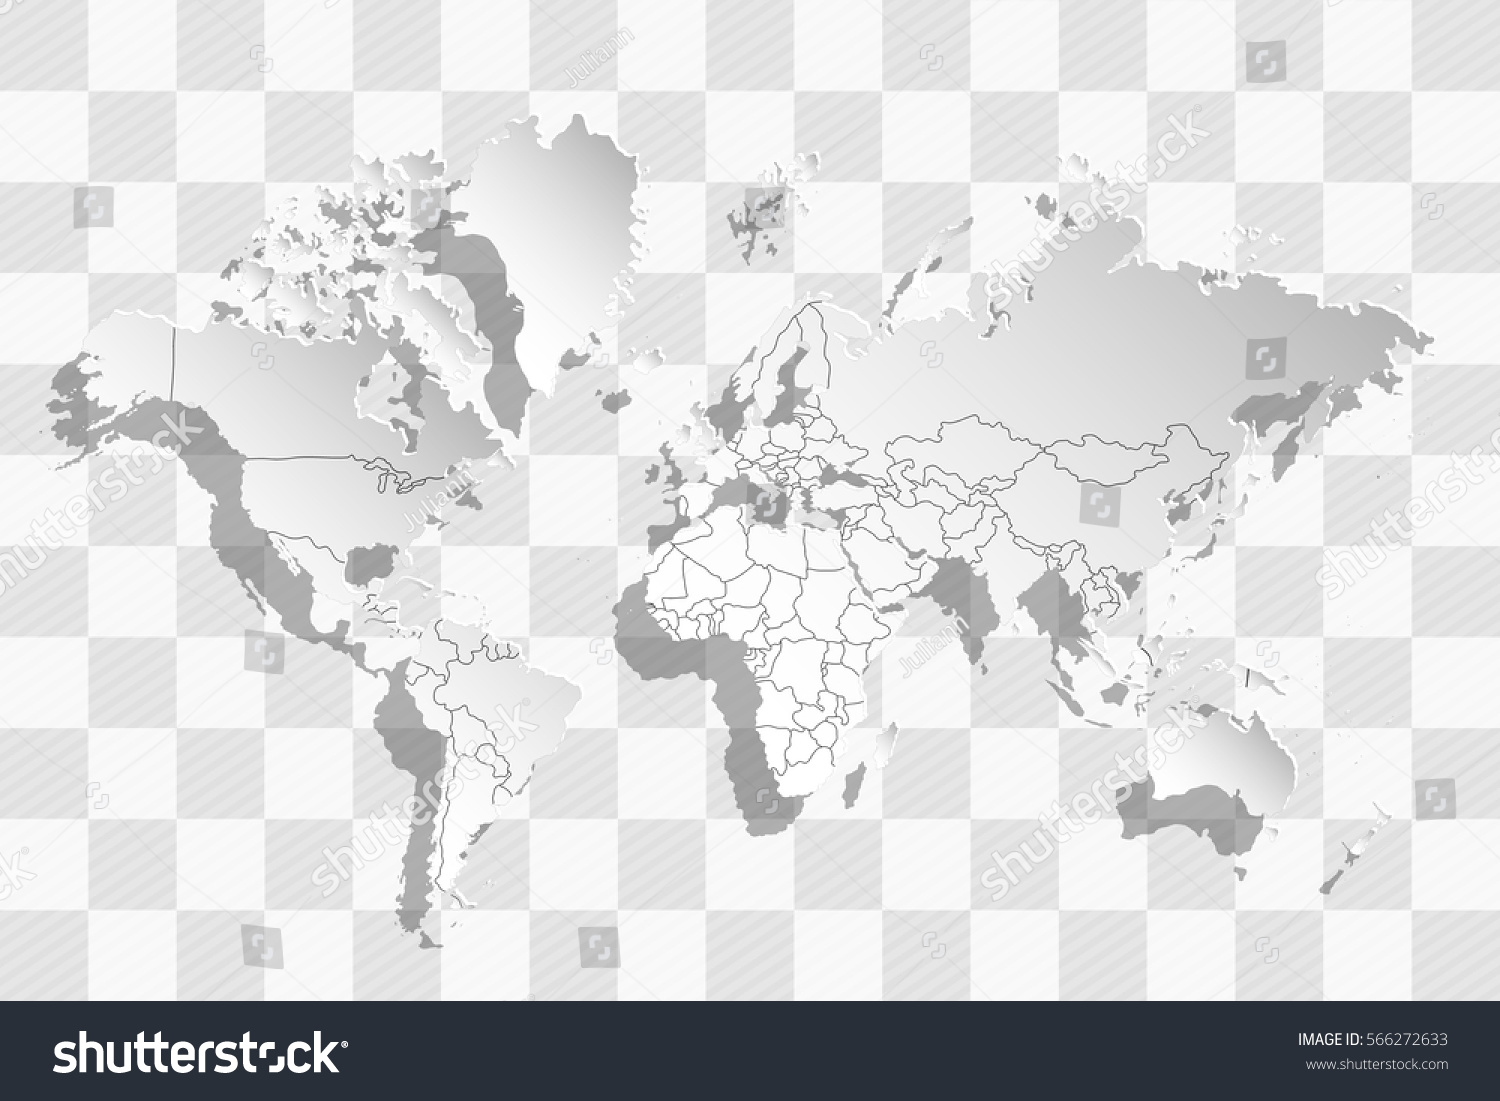 Stock Vector Political Map Of The World Gray World Map Countries Vector Illustration 566272633 